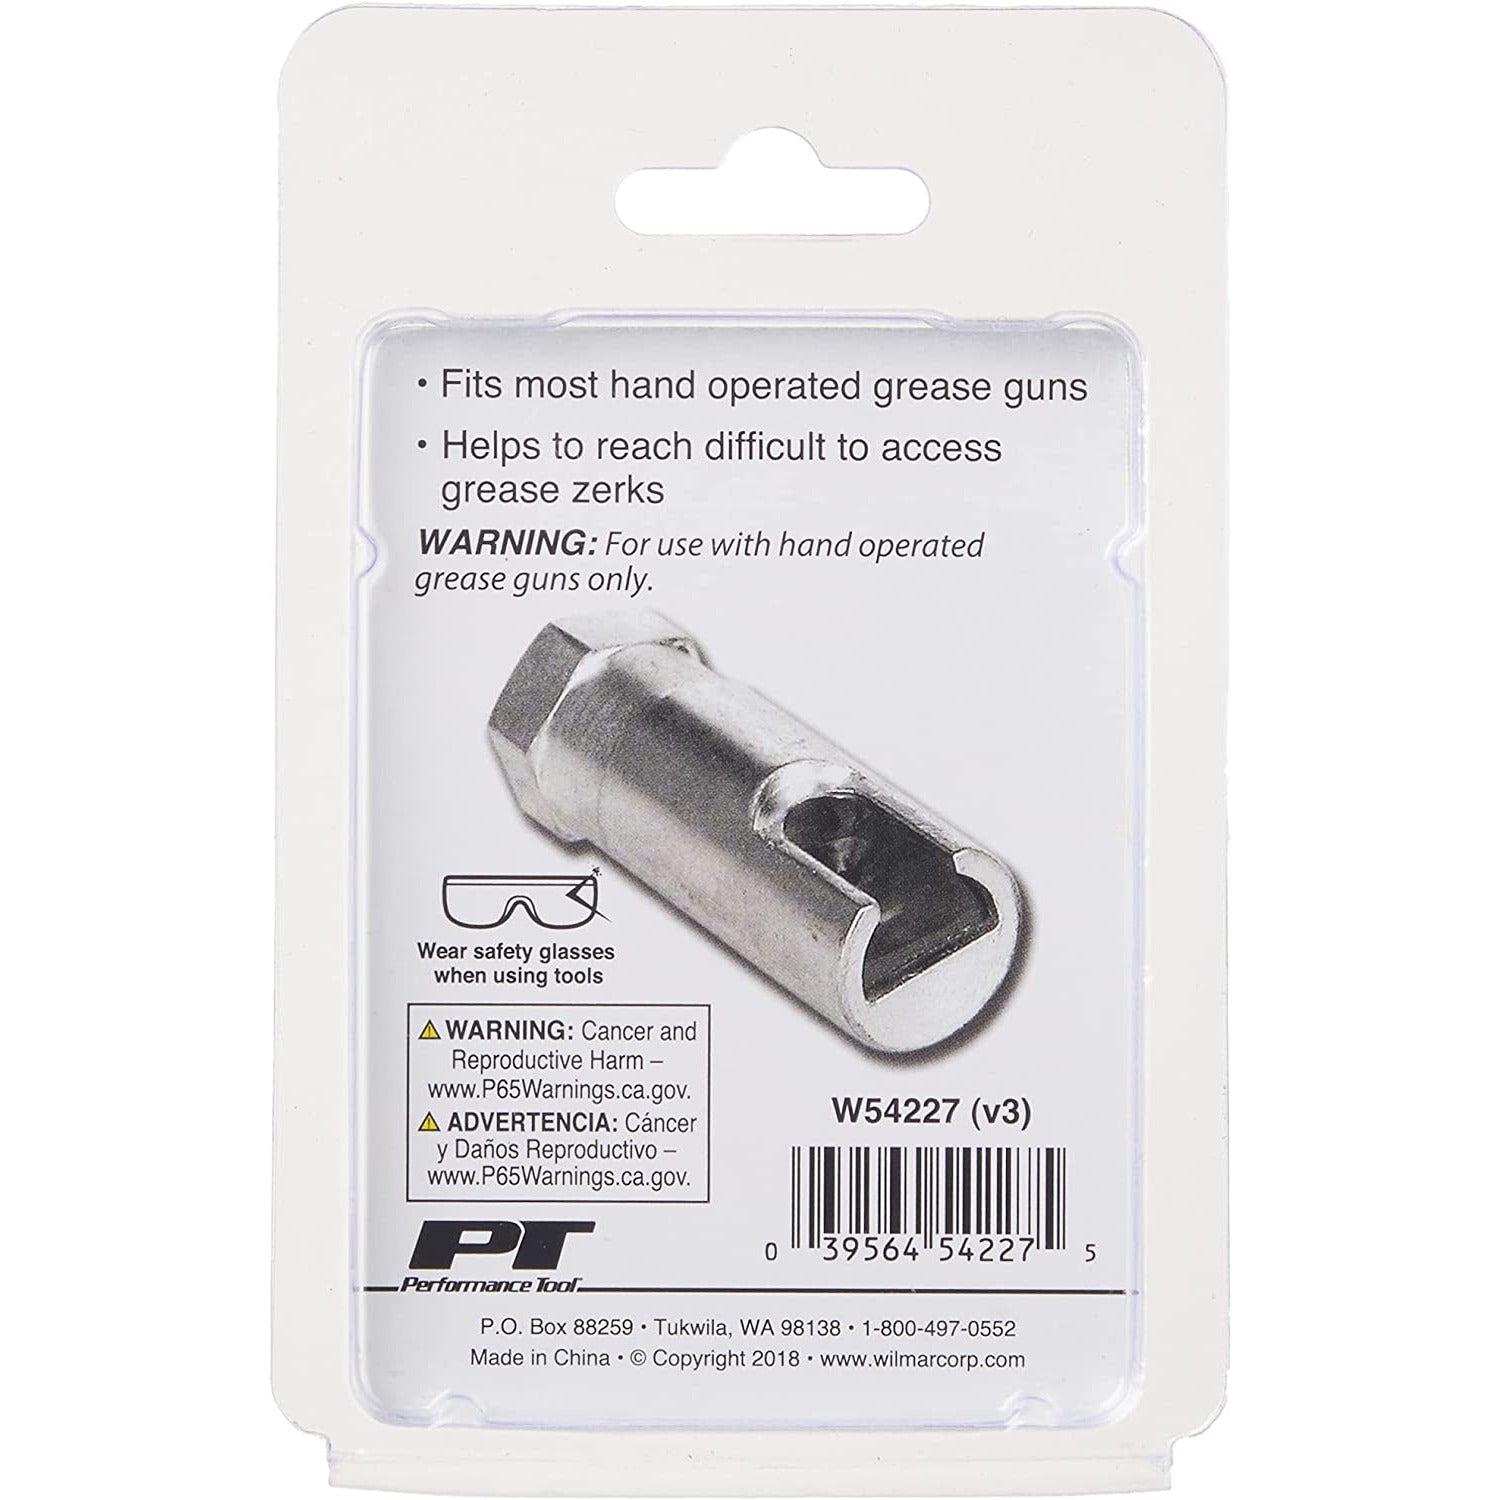 WIL W54227 Performance Tool Grooved Right Angle 90 Degree Grease Gun Coupler (1/8" NPTF)